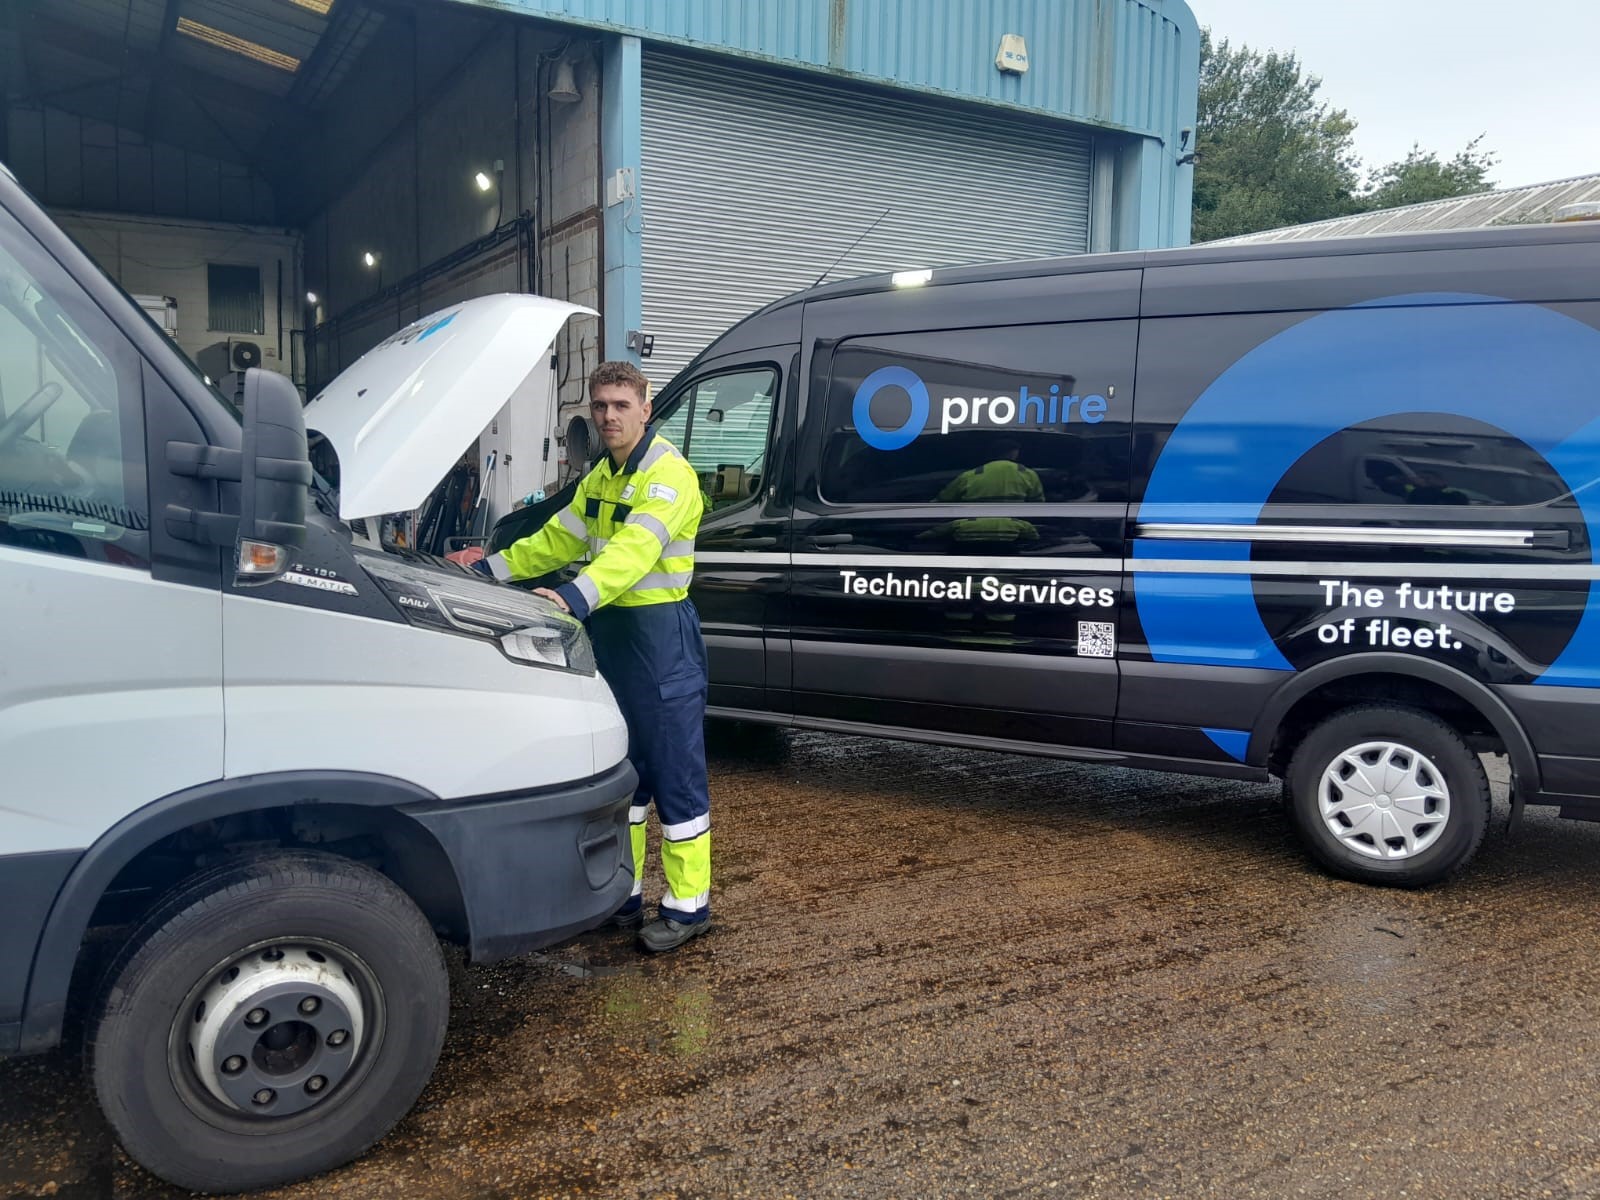 Prohire invests in sustainable mobile technician solution to service customers nationwide